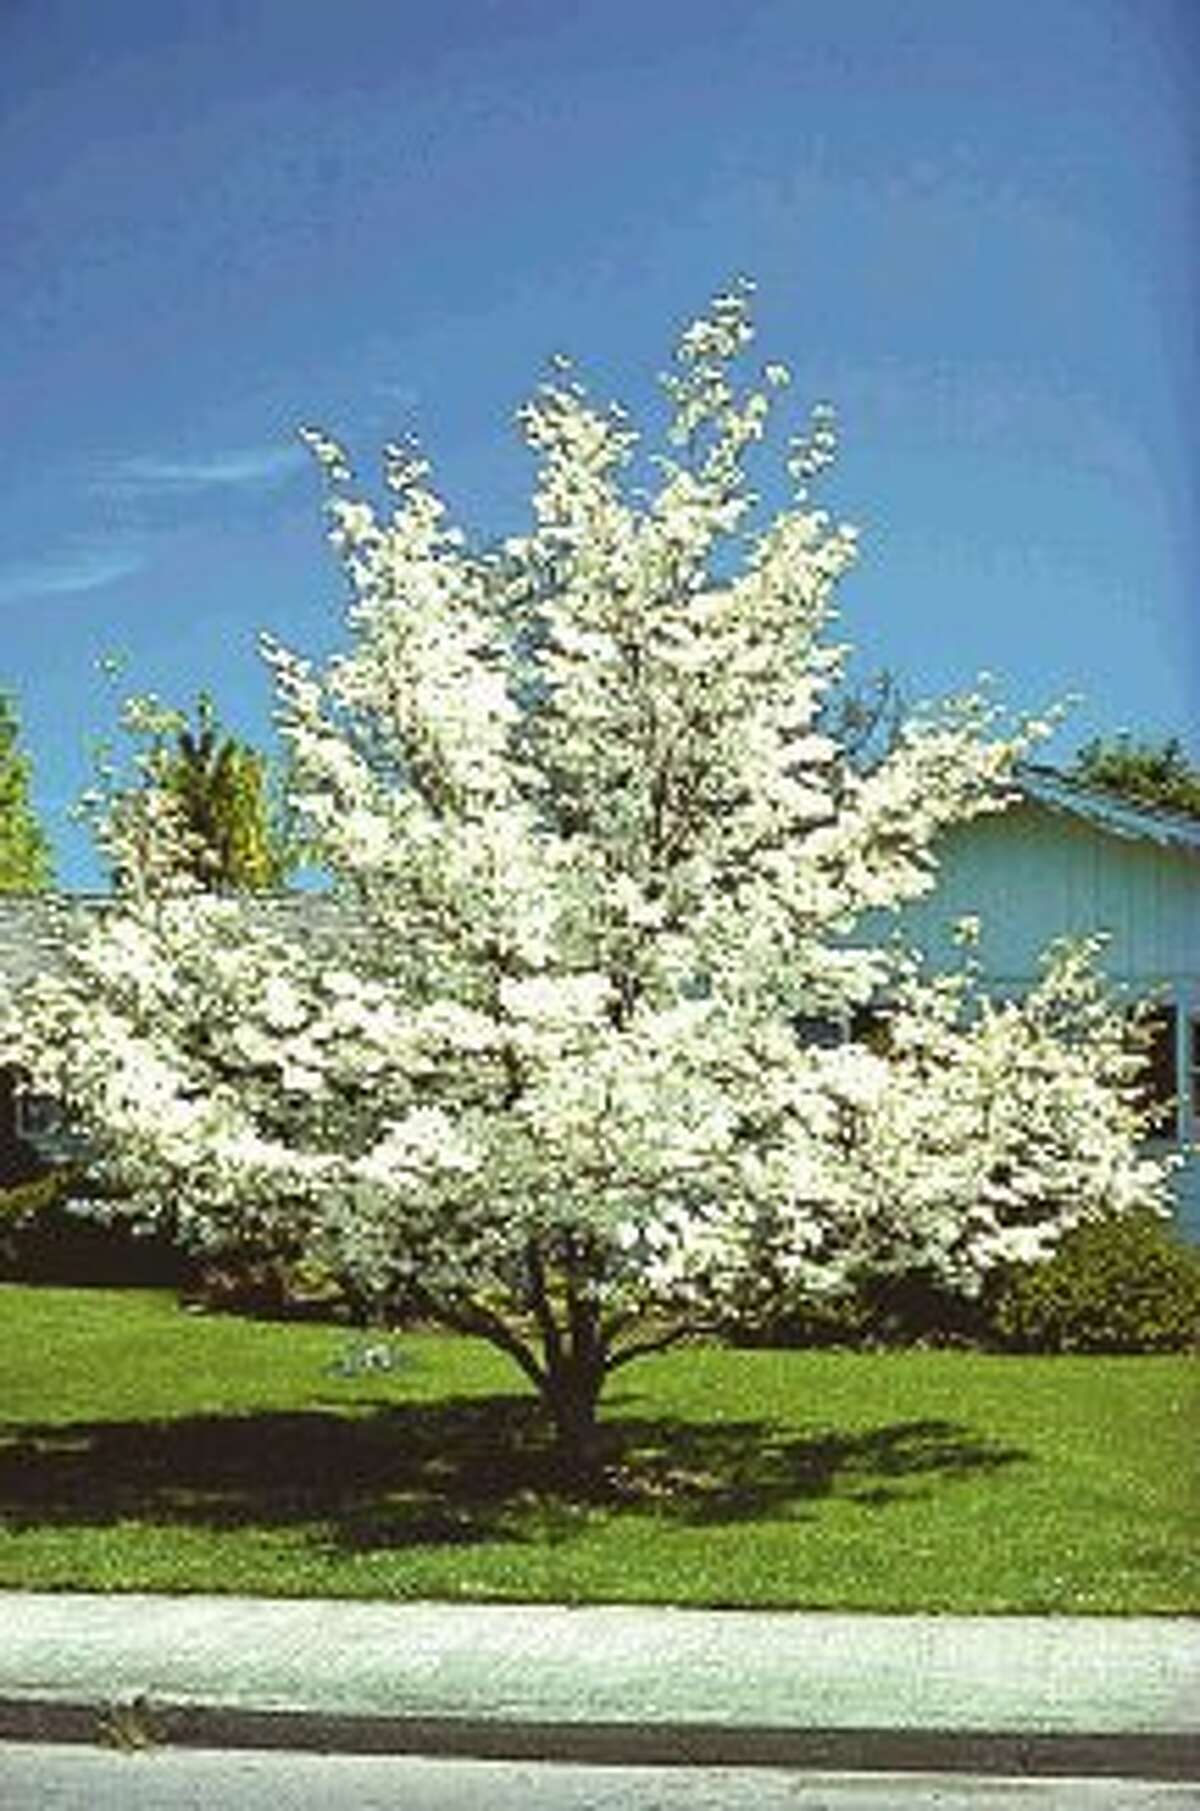 Join Arbor Day Foundation in August, get 10 free flowering dogwood trees